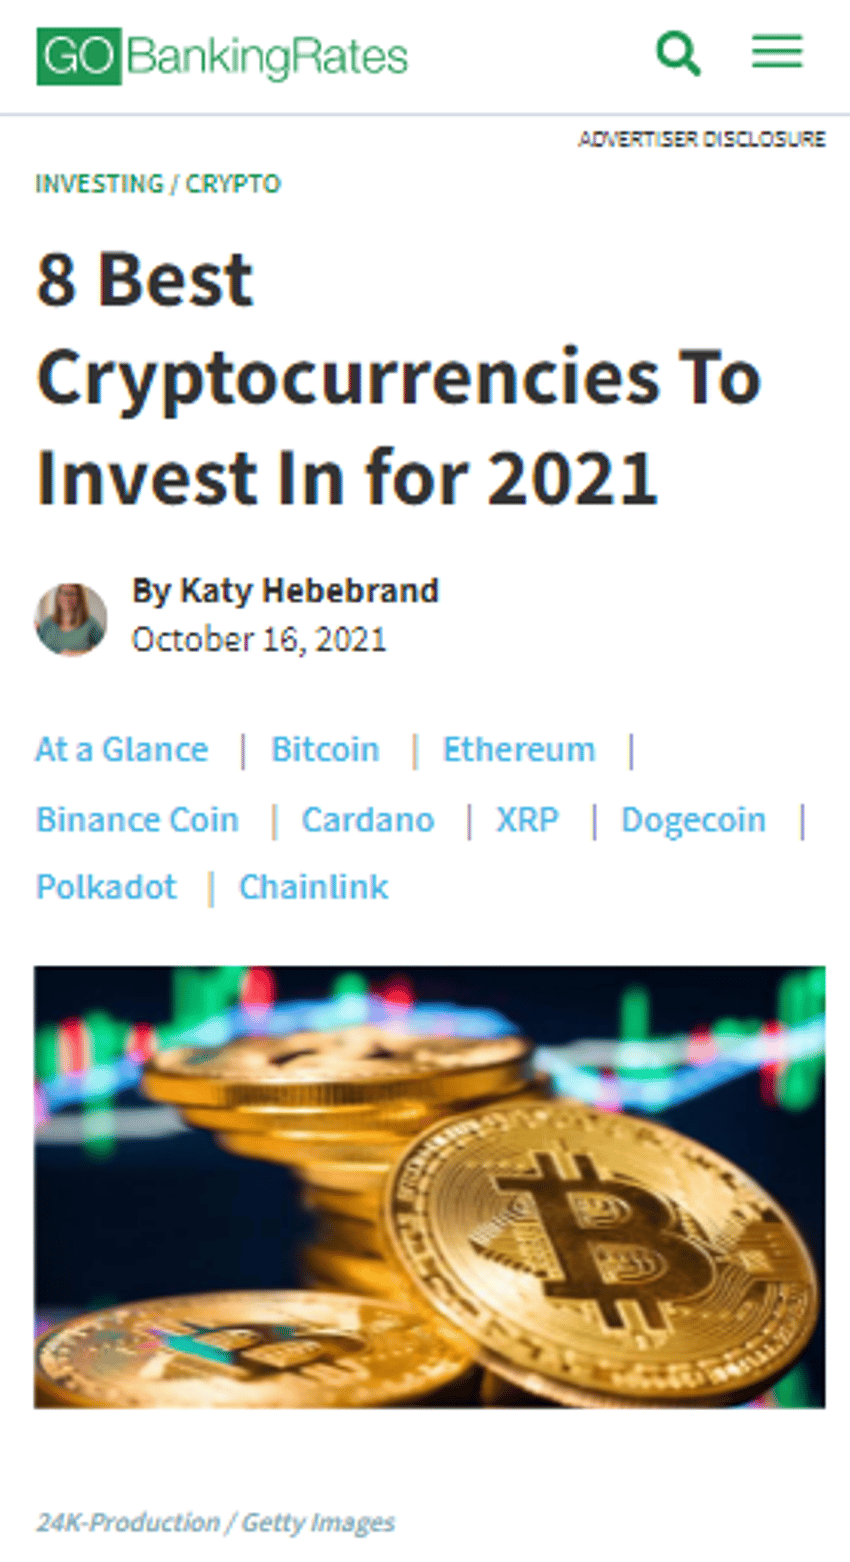 check out the full post [here](https://www.gobankingrates.com/investing/crypto/best-cryptocurrency-to-invest-in/)